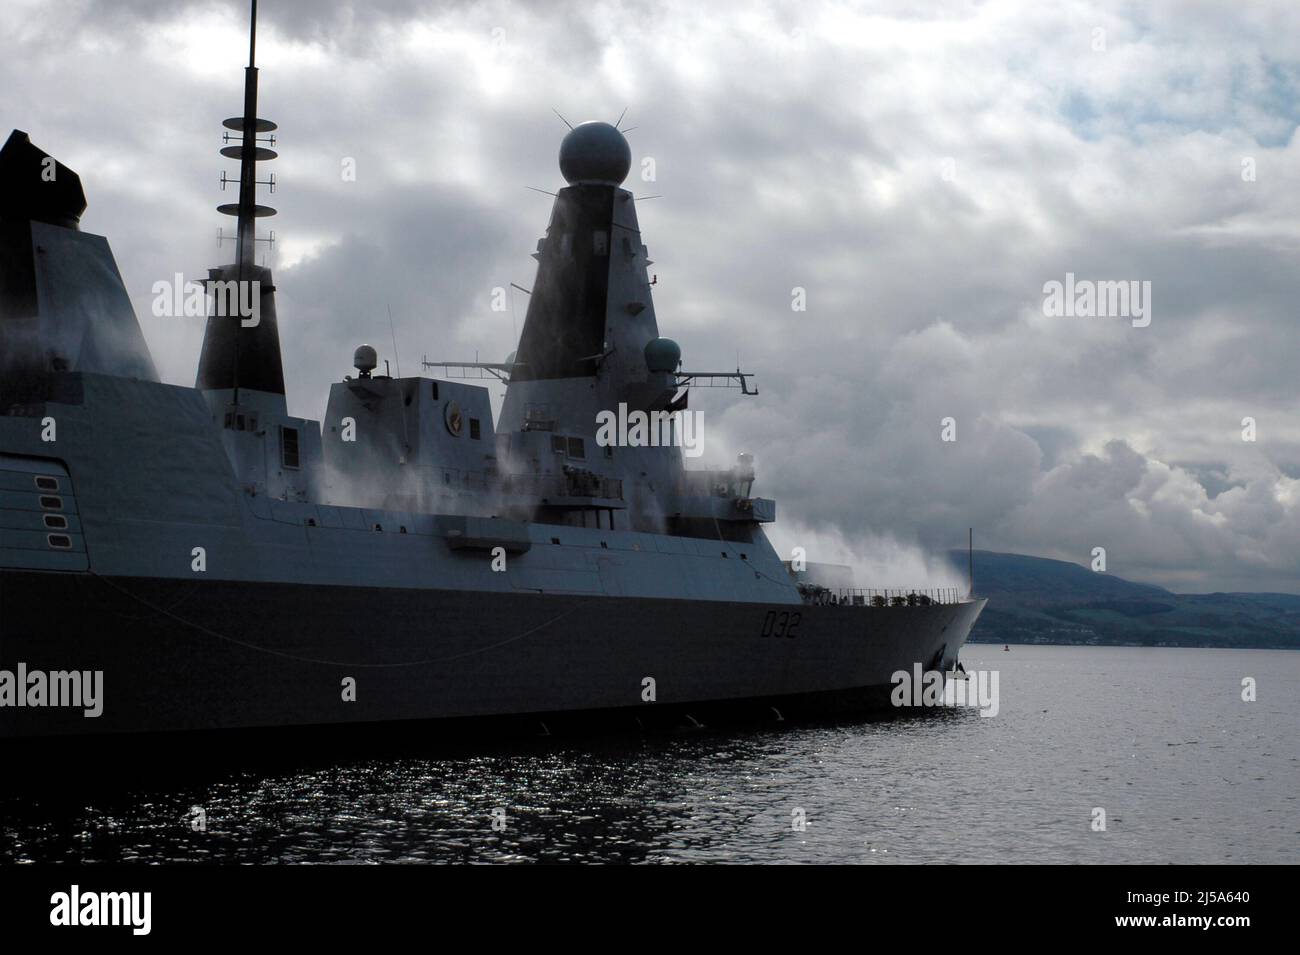 AJAXNETPHOTO. 1 MAY 2008, LARGS, SCOTLAND. - NEW TYPE 45 DESTROYER DARING (NOT YET HMS) ON SEA TRIALS - WET-DOWN AFTER NUCLEAR ATTACK DEMO. PHOTO:JONATHAN EASTLAND/AJAX REF:RD280105 1523 Stock Photo